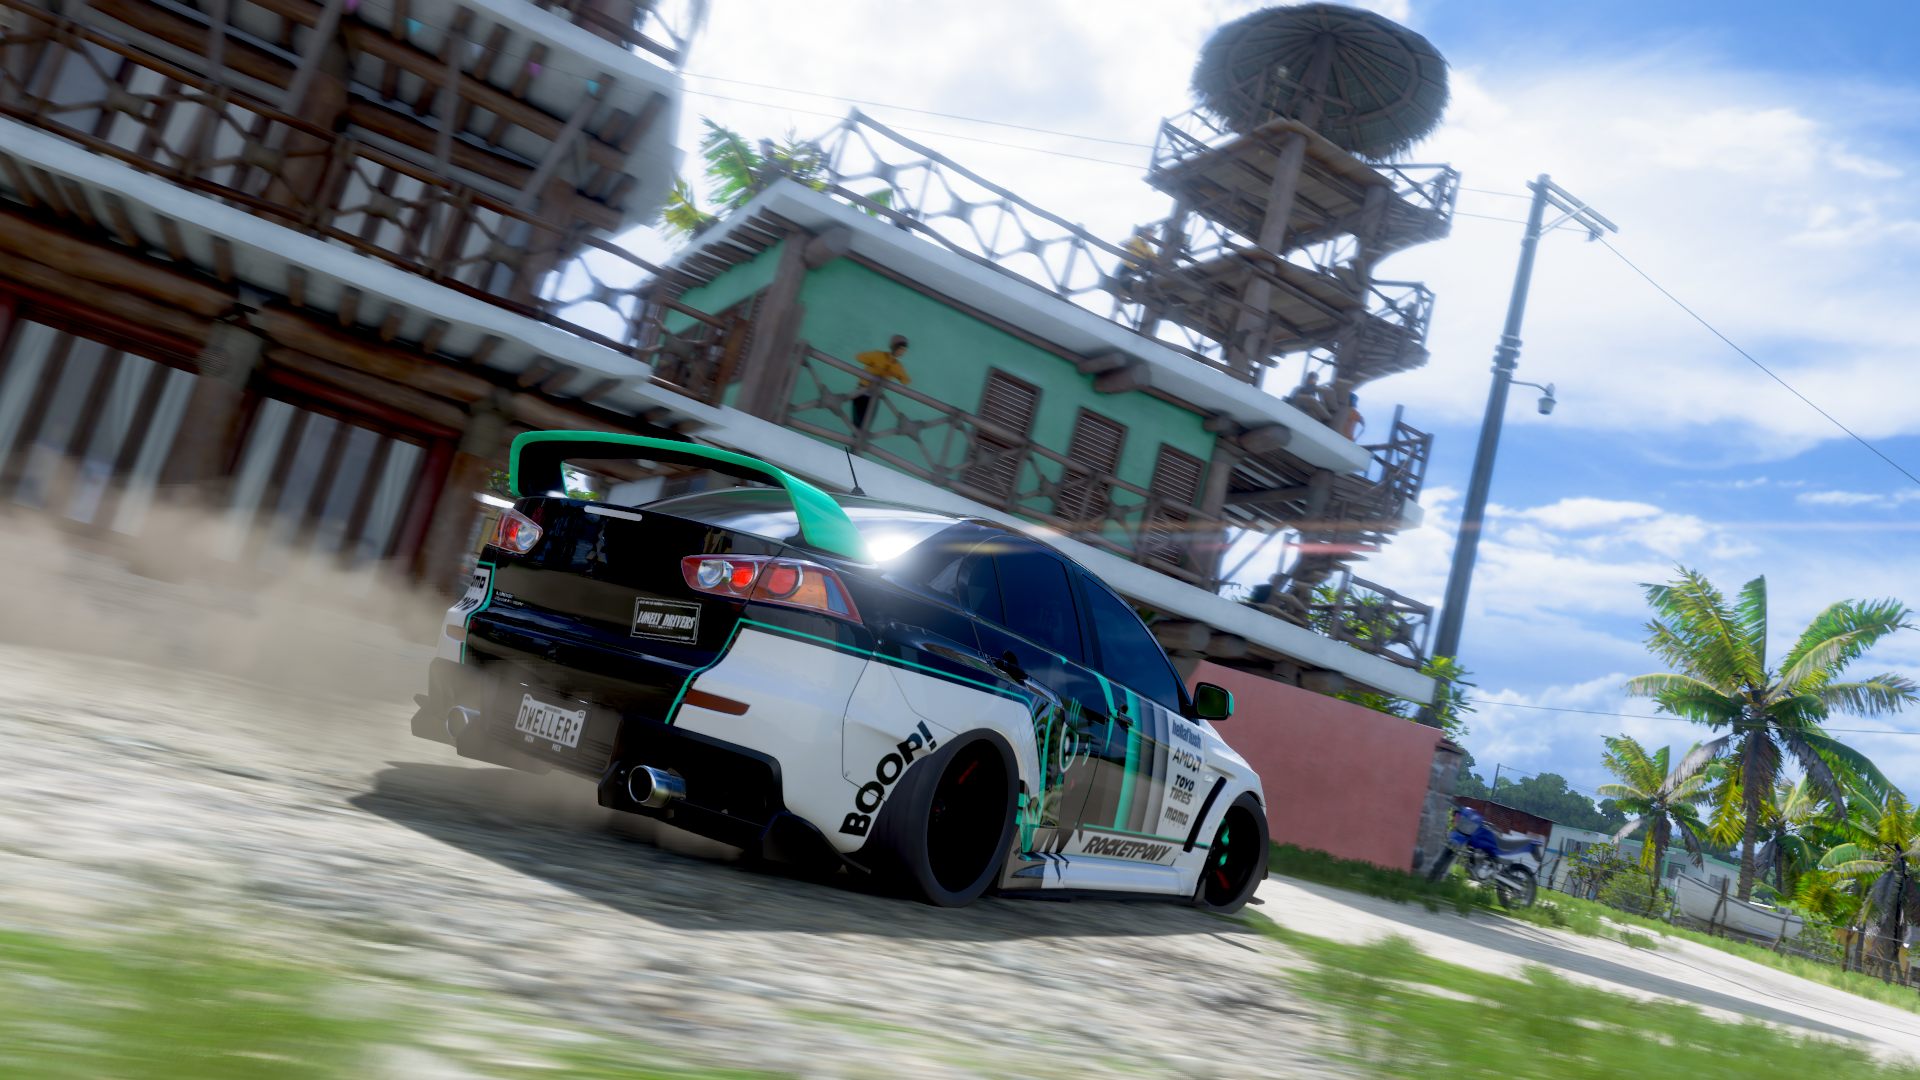 General 1920x1080 Forza Horizon 5 Mitsubishi Lancer Evo X video games Mitsubishi bodykit Japanese cars PlaygroundGames car rear view taillights licence plates palm trees video game art clouds sky smoke CGI sunlight building screen shot driving vehicle ground pony My Little Pony